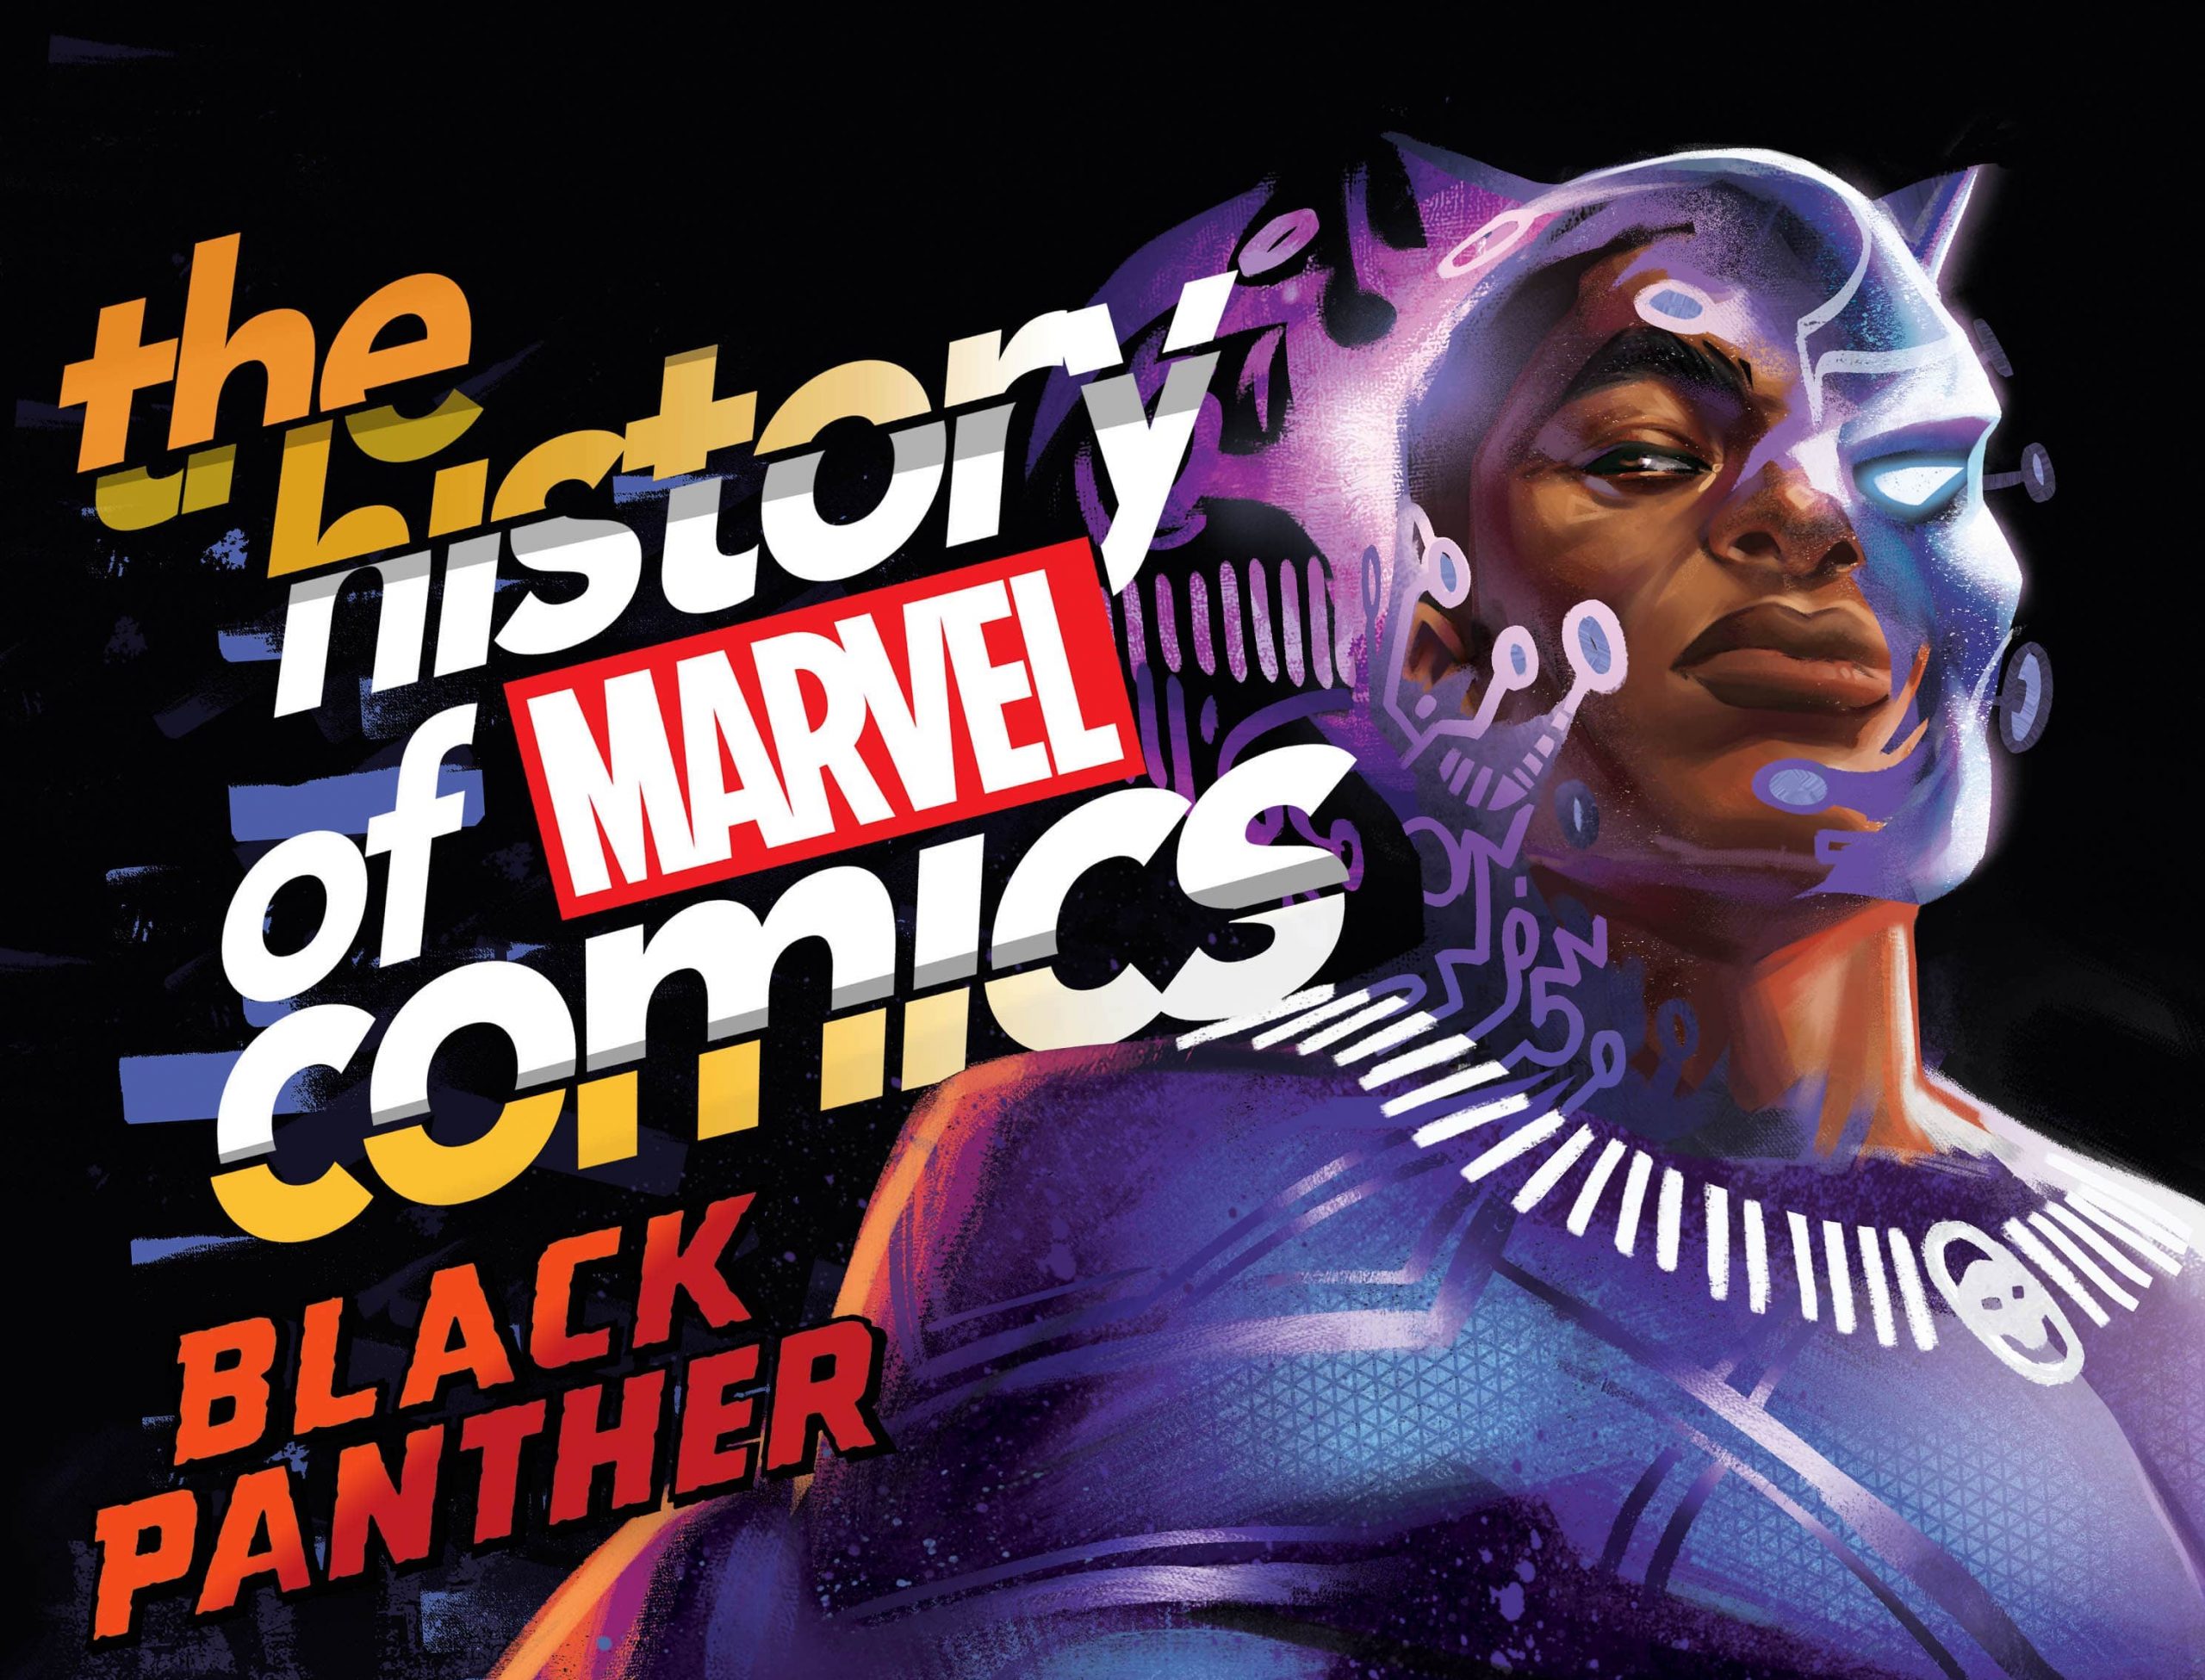 'The History of Marvel Comics: Black Panther' podcast coming February 14th